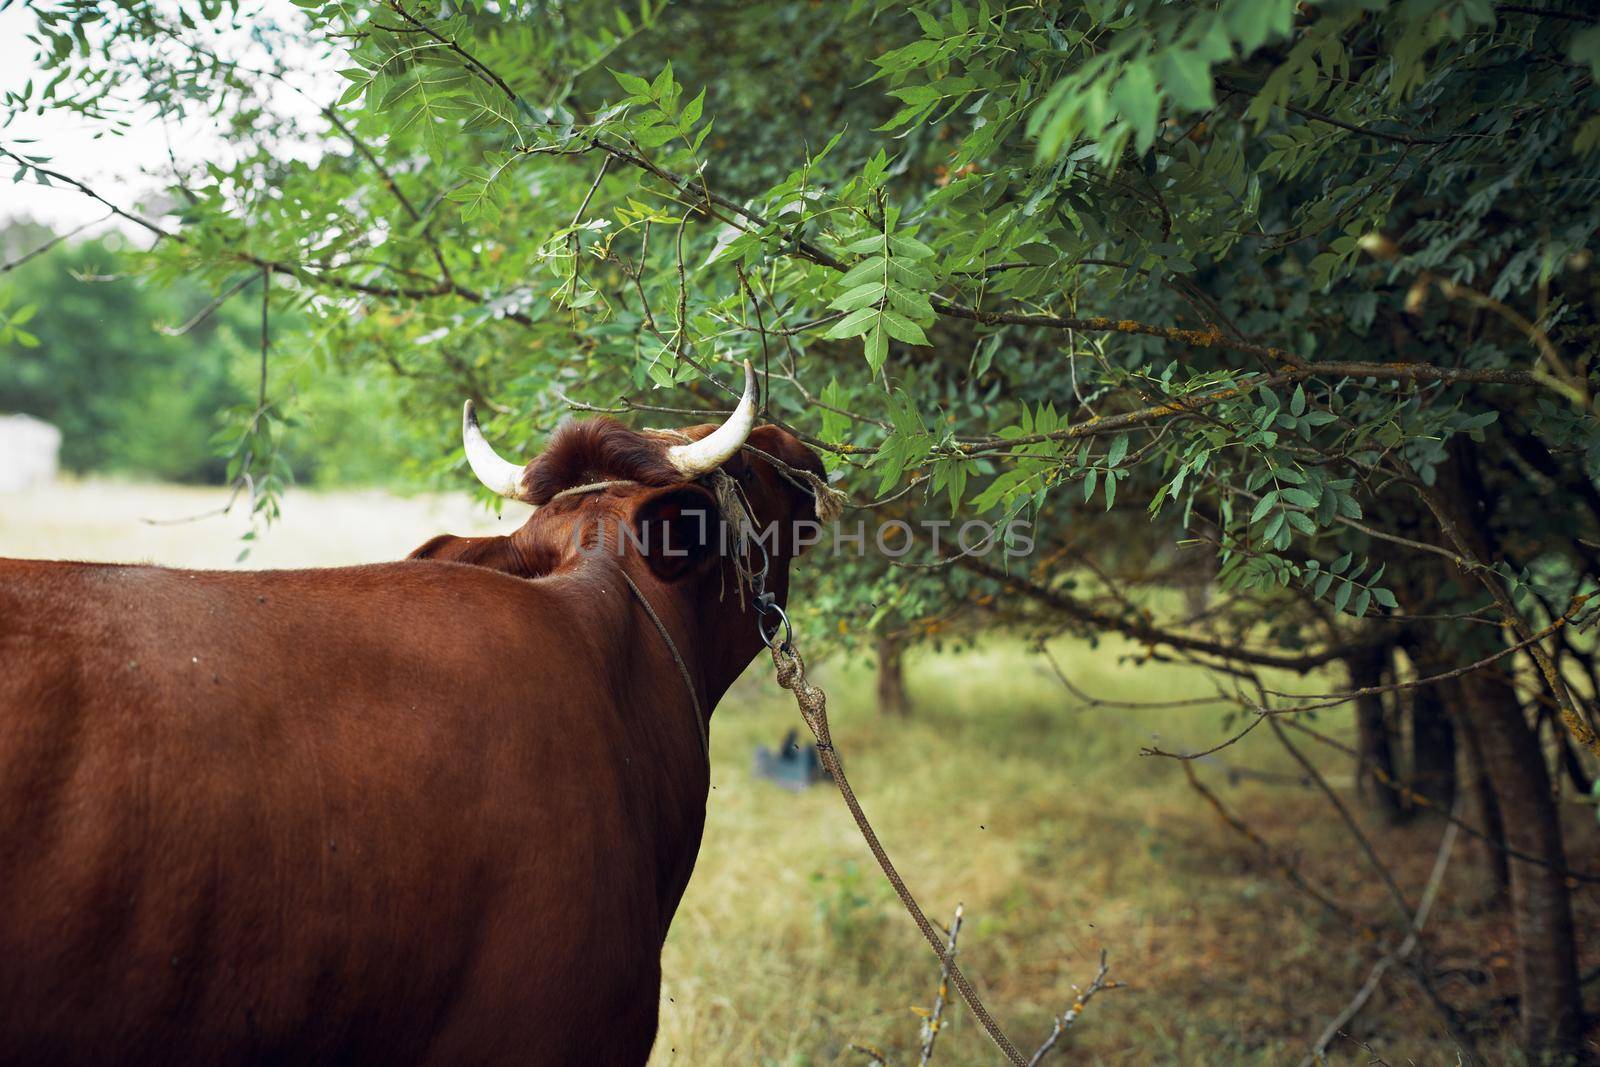 animals mammals grazing farm cow nature agriculture by Vichizh